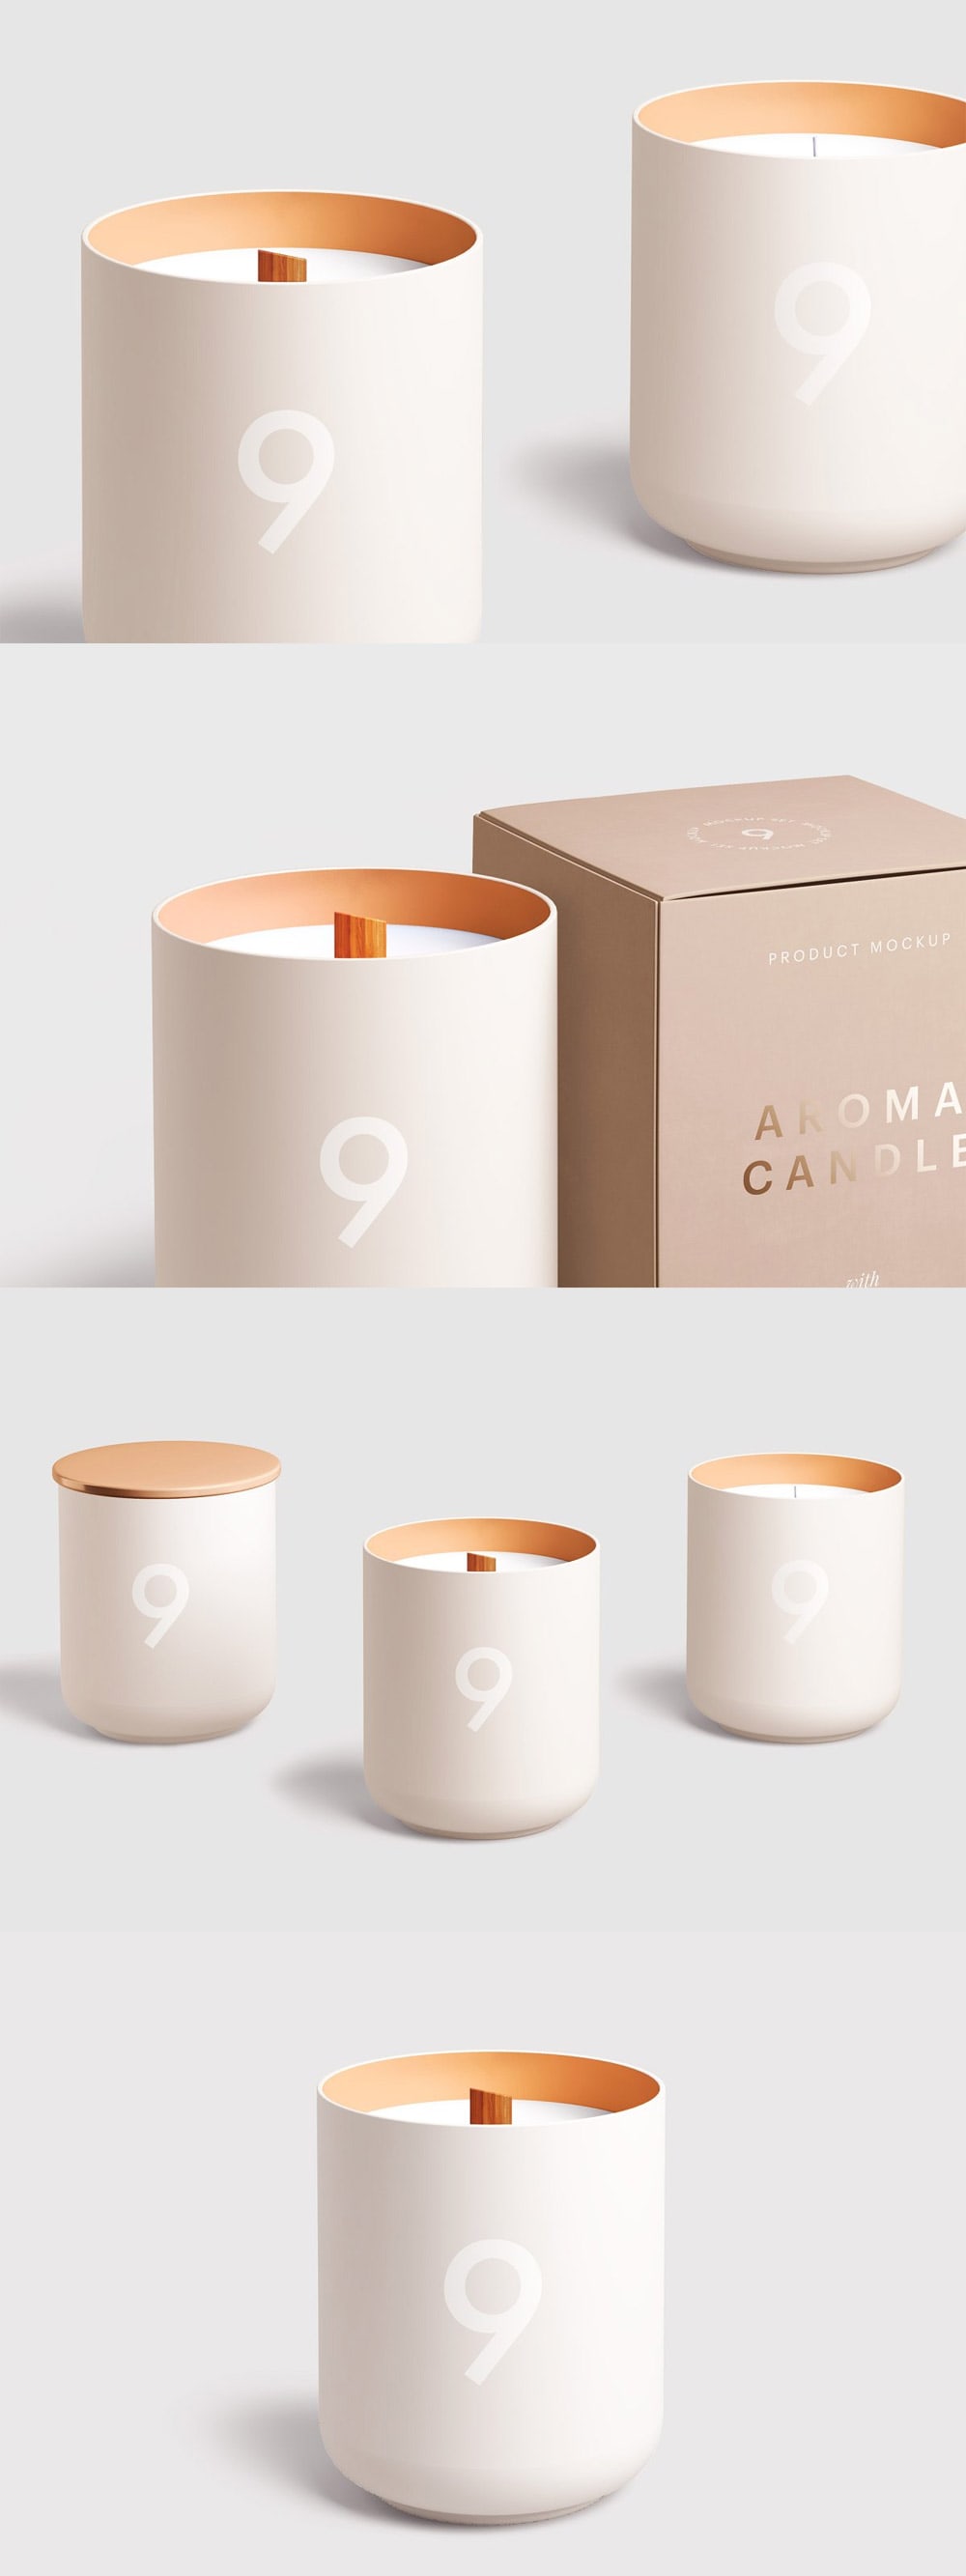 Download Candle Glass Package Mockup Set - Find the Perfect Creative Mockups Freebies to Showcase your ...